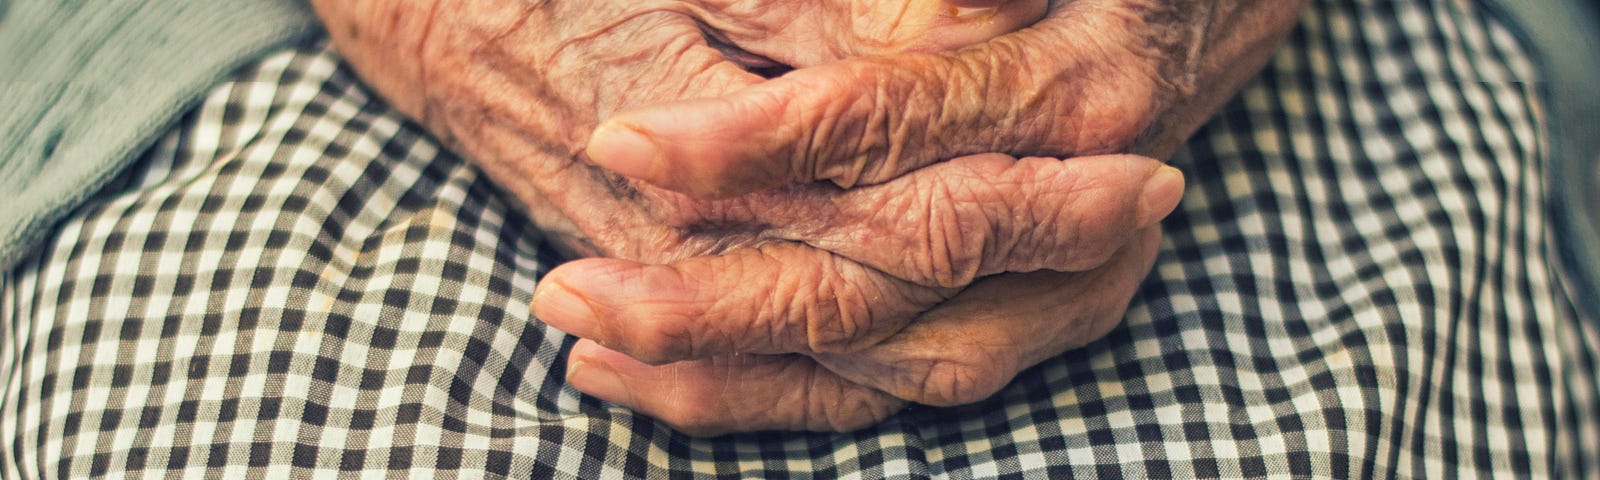 An old person’s hands clasped